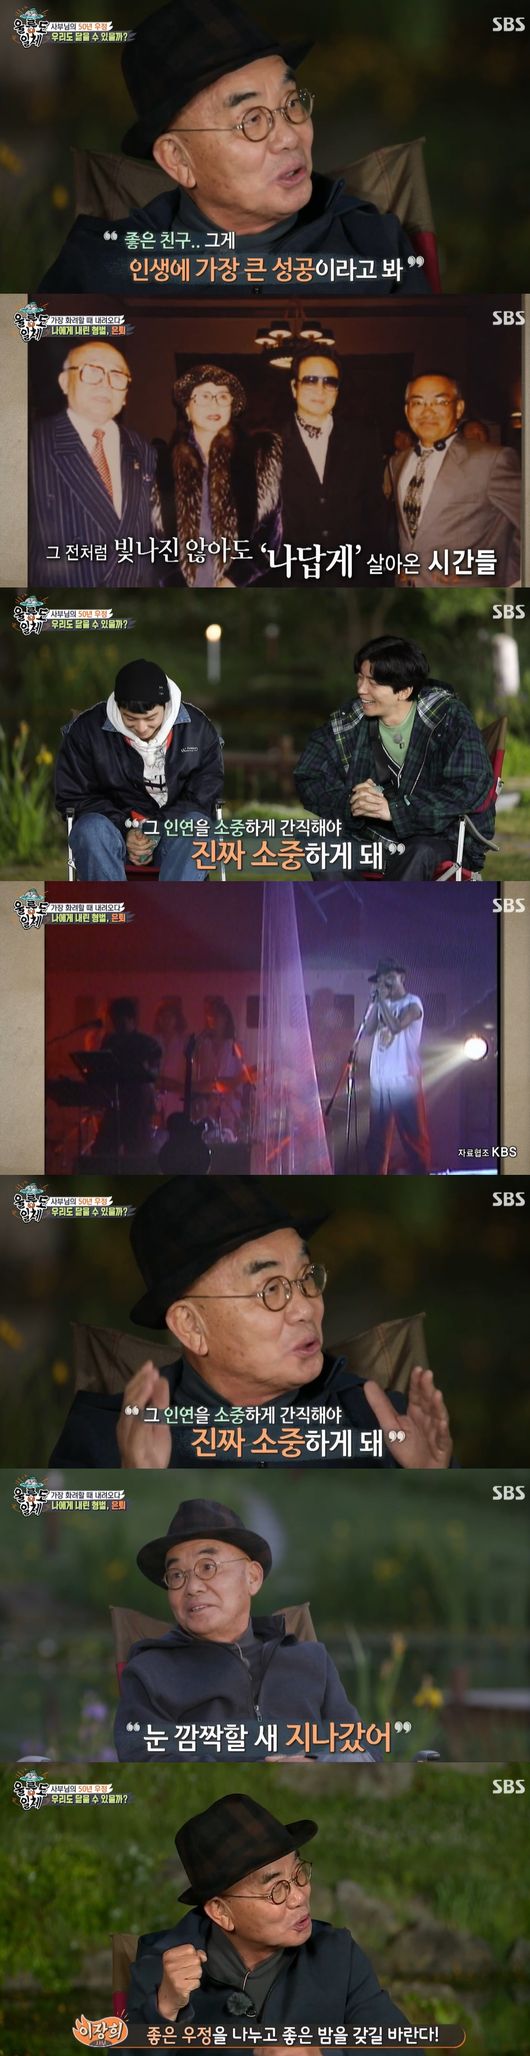 In All The Butlers, Yi Jang-hui revealed the Ulleungdo land flex, which made everyone admire.SBS entertainment All The Butlers broadcasted on the 20th was broadcast.Yi Jang-hui, who appeared as a master on the day, said that Yi Jang-hui decided to retire in four years, saying, My song would have been the most forbidden song in Korea.It was a forbidden song because you were transferring the sin to others because you encouraged drinking, he said. The burning window was a forbidden song to encourage adultery. I was shocked. Yi Jang-hui said, I did not retire, but I was singing well at that time, and the cannabis wave was happening at that time. I was doing a late-night DJ at that time, and suddenly took me to Seodaemun Detention Center in the evening.It snowed outside the window, he said. I was once the most famous singer and composer, and I am here for my wrong behavior. What now?I wanted to stop this, he said.Again, it was gathered at Ulleung Heaven Center in Yi Jang-hui.The members said, Ulleungdos view is so beautiful, Yi Jang-hui said, I will give you the land here, so build a house.The members cheered Yi Jang-hui, who showed the land flex for the first time, saying, The master who gives the land in history is the first.Everyone said, What is this Plex? Do a verbal contract. Yi Jang-hui said, It is good to live with people who like it.In the meantime, I cheered the last Cha Eun-woo and Shin Sung-rok, saying, I want to share a good friendship.Yang said, It was a day that was mentally difficult today.Shin Sung-rok said, It is good to meet my master, but it was good to work together, it was really comforting.Cha Eun-woo also said, I was in the Knowing Brother while I was working on my comeback as an astro, so I told him that I had a smell of my brothers and sisters.In the meantime, I thought I should go to see my brothers rather than think of shooting, I was really good brothers, how better is it?All of them said, I am sorry for sleeping today, but I still have a romance that my graduation trip is Ulleungdo.All The Butlers broadcast screen capture